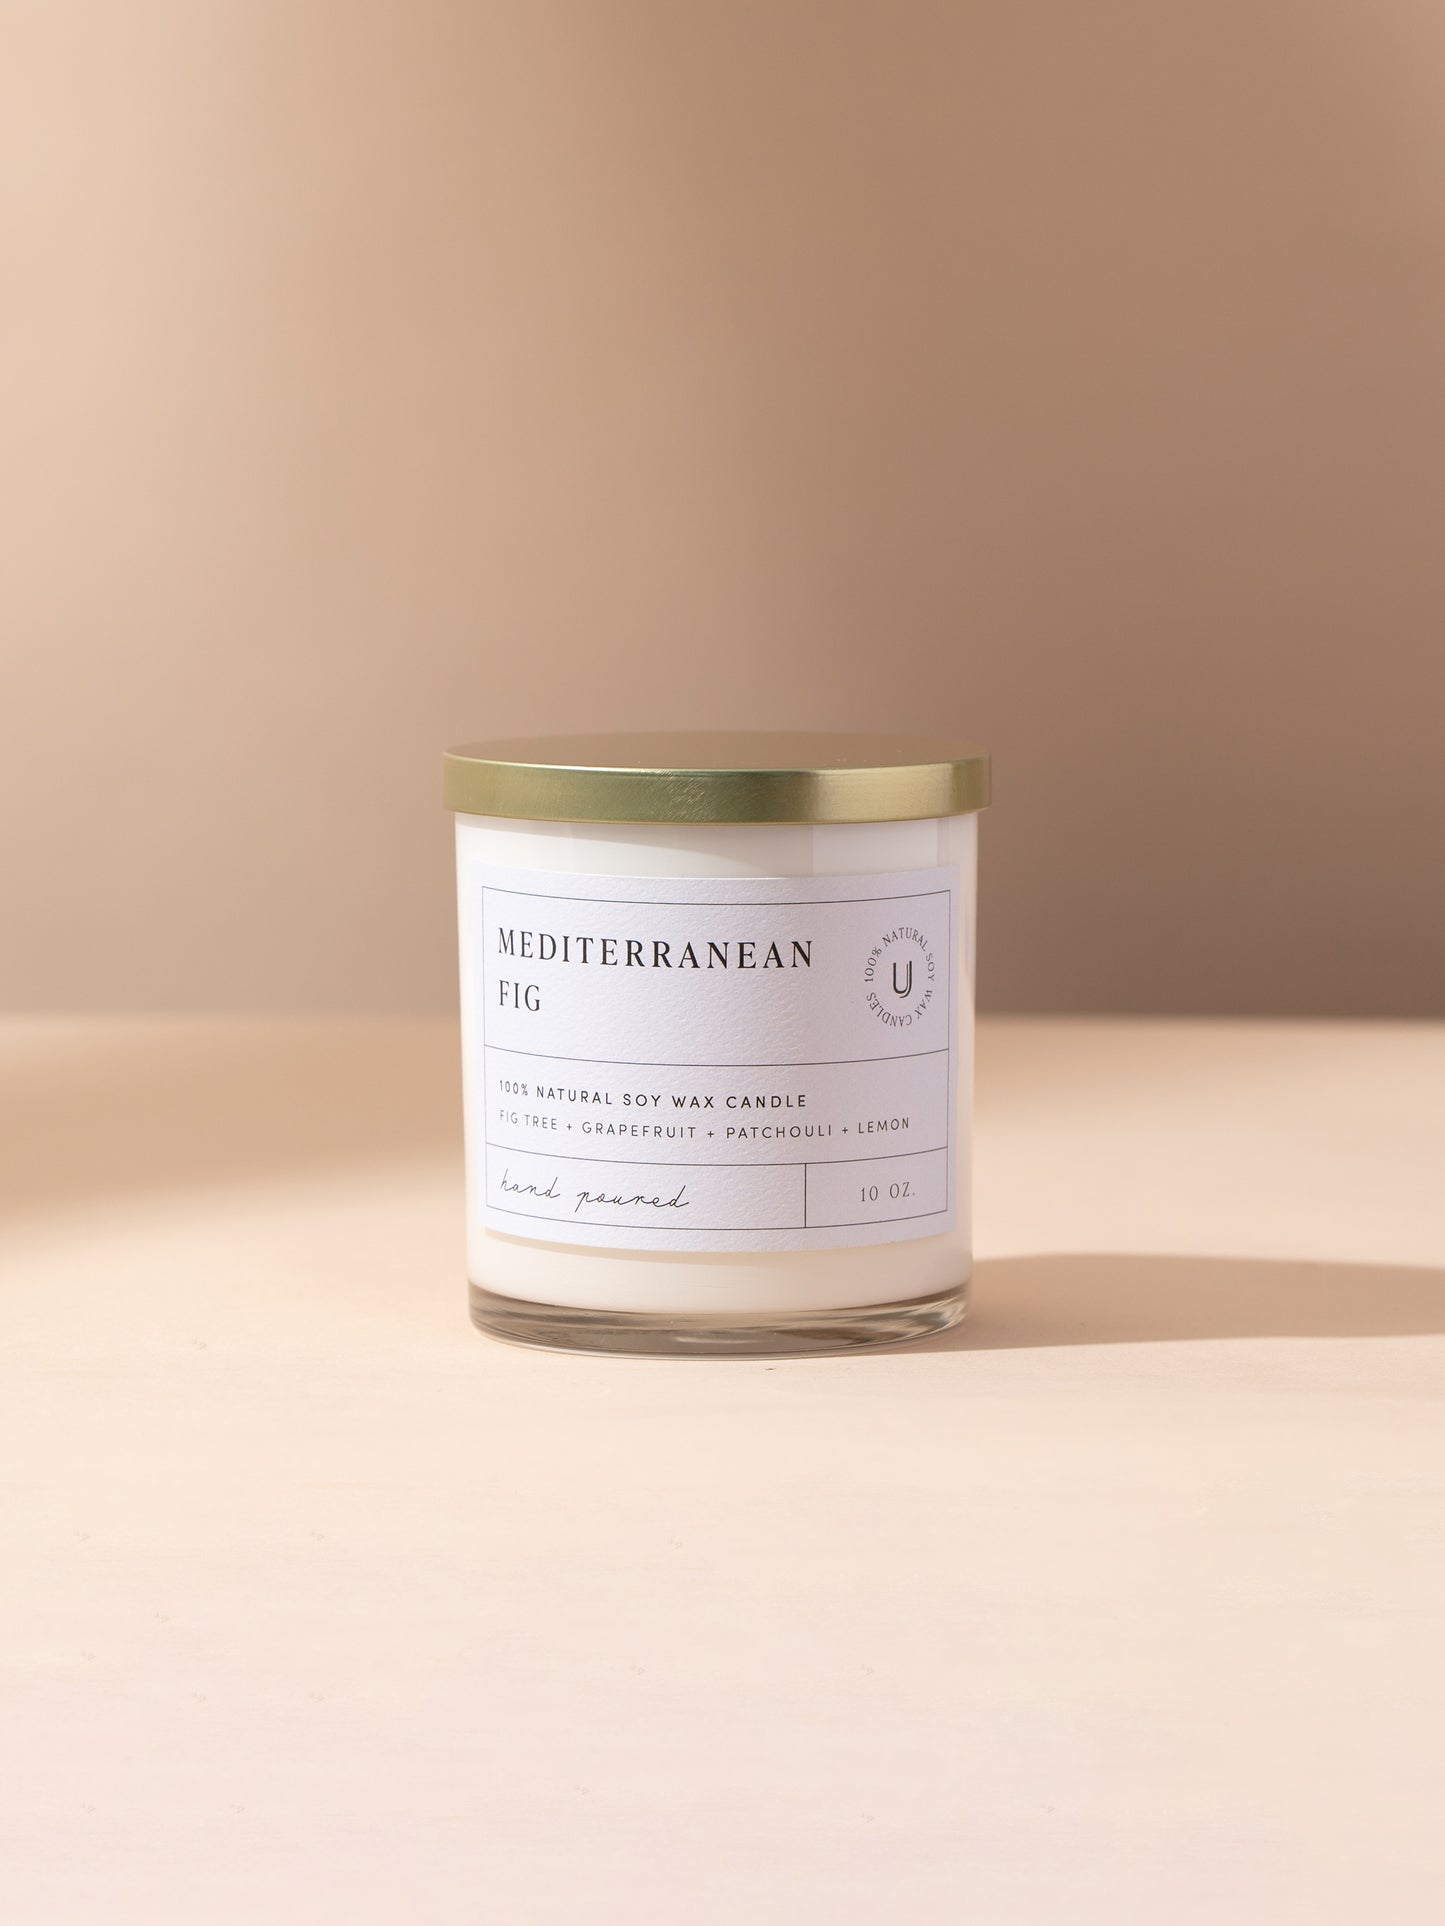 Mediterranean Fig Candle | 10 OZ | Product Detail Image | Uncommon Lifestyle